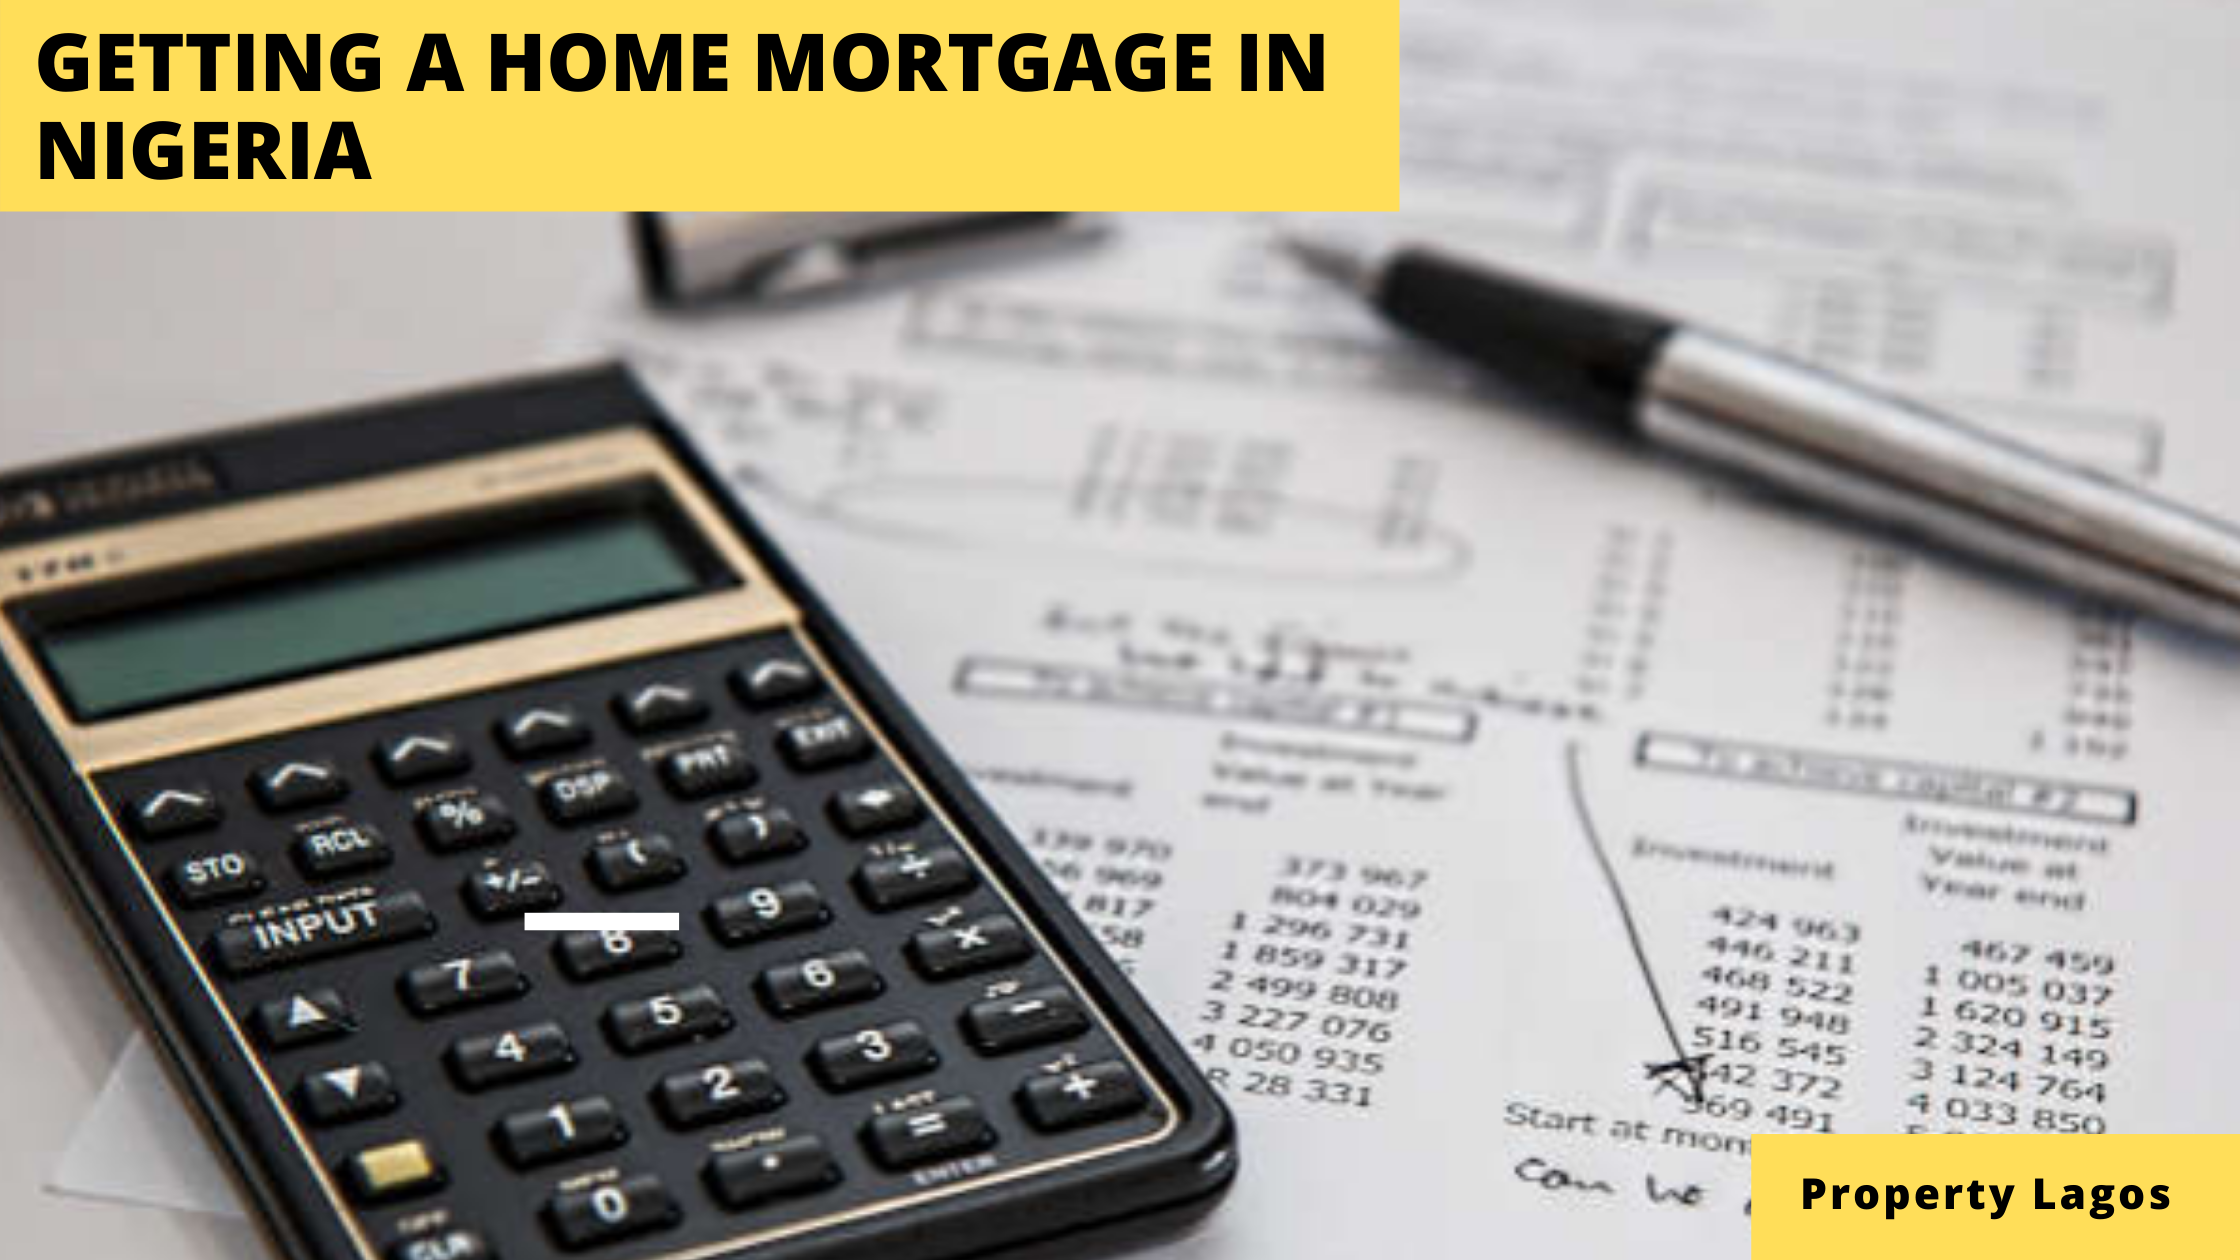 Getting a HOME MORTGAGE IN NIGERIA